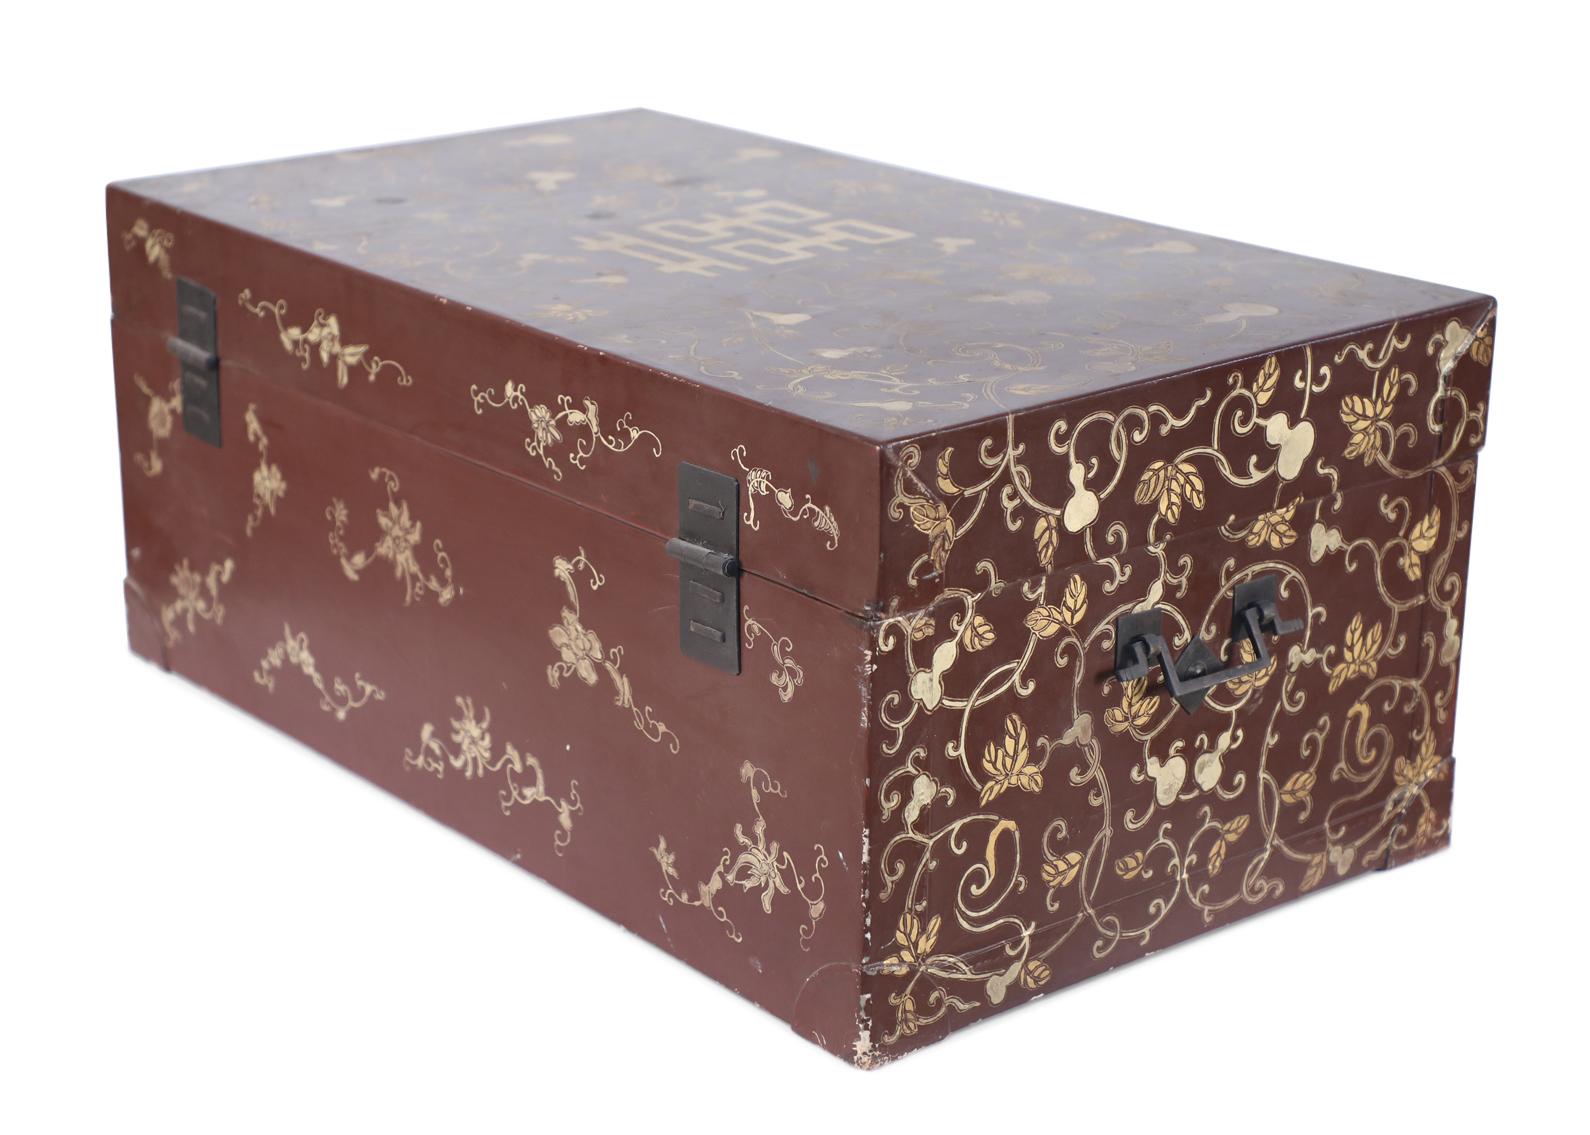 20th Century Chinese Burgundy and Gold Vine Design Painted Decorative Box For Sale